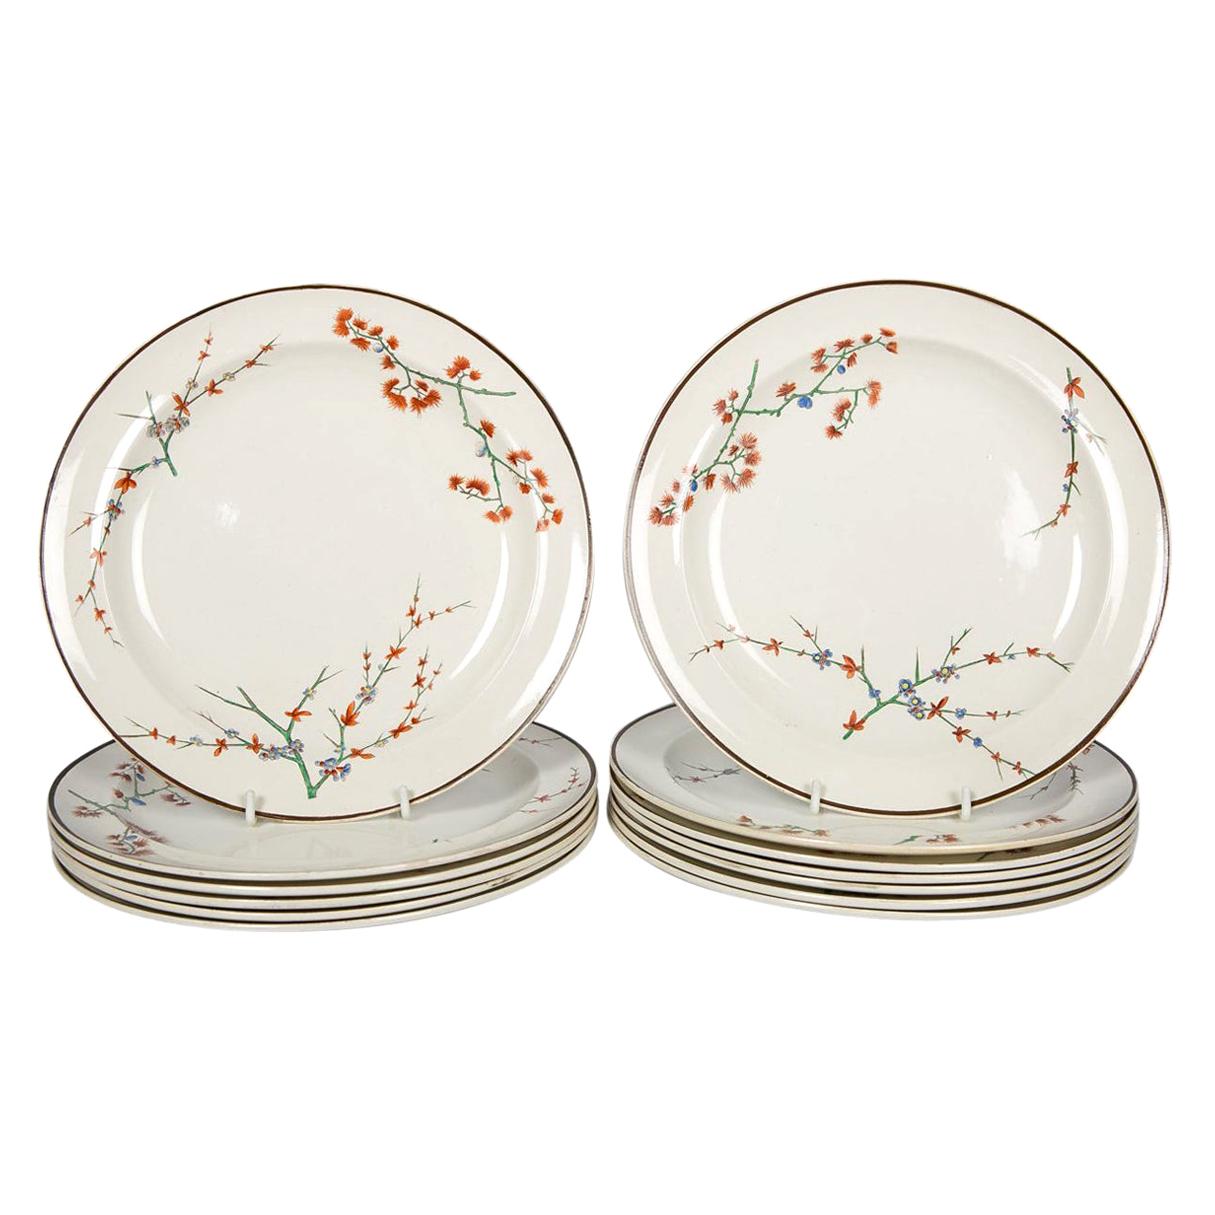 26 Wedgwood Creamware Dinner Plates with Thistle Design Made, circa 1880 For Sale